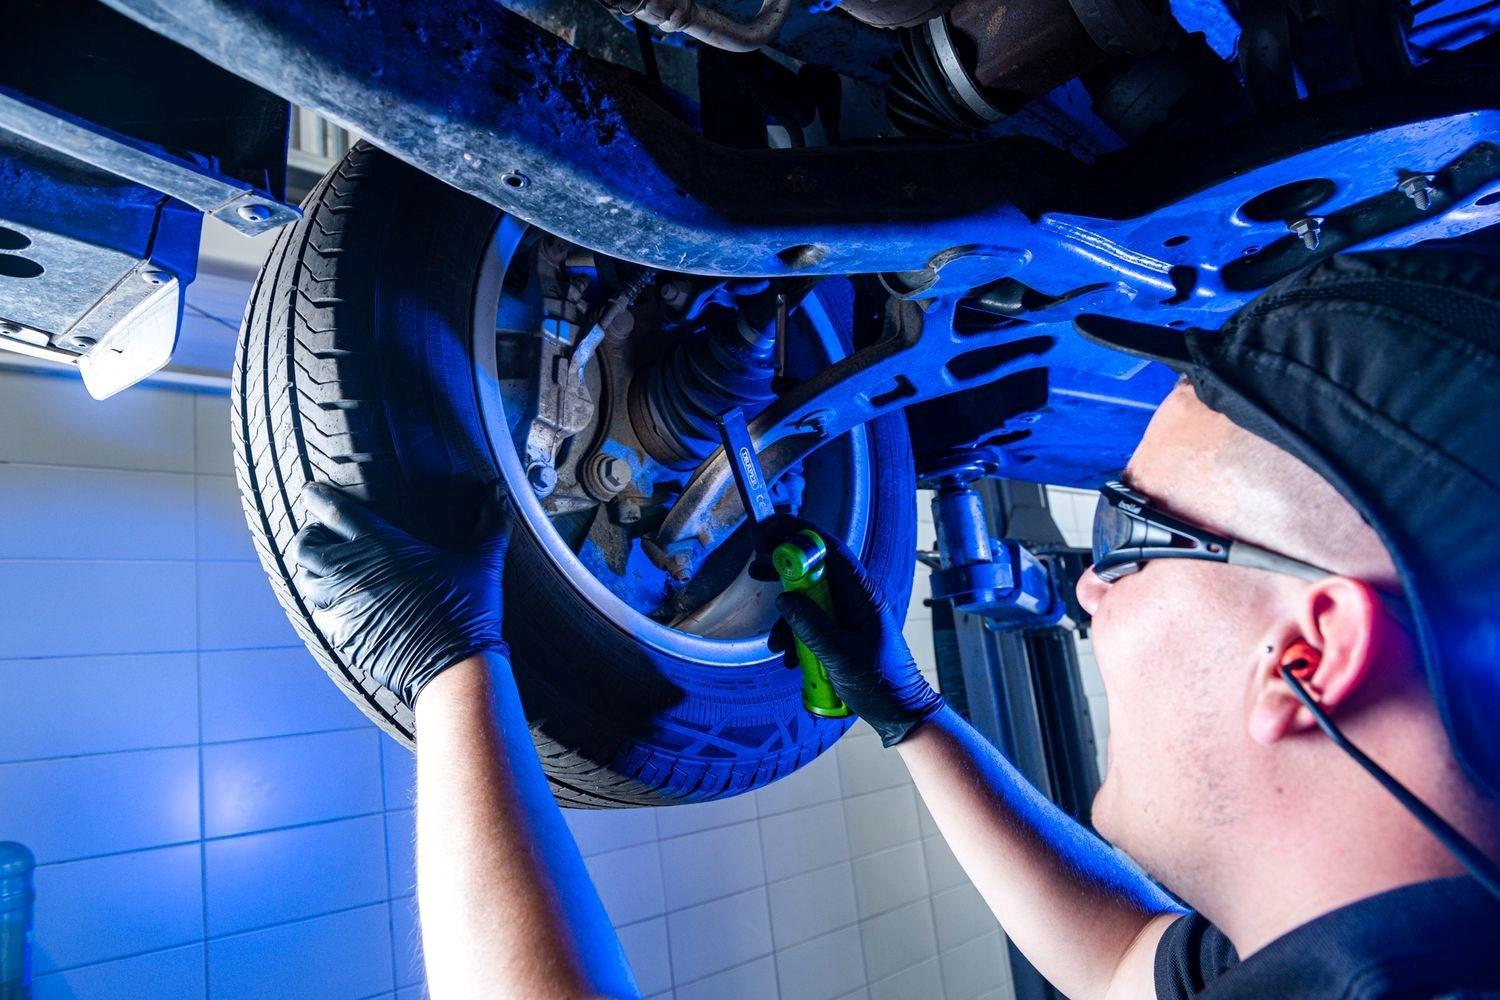 Volkswagen Commercials Technician inspects the wheel of a Volkswagen Caddy with a blue light at the Volkswagen Approved Repair Centre, Agnew Van Centre, Mallusk, Northern Ireland.